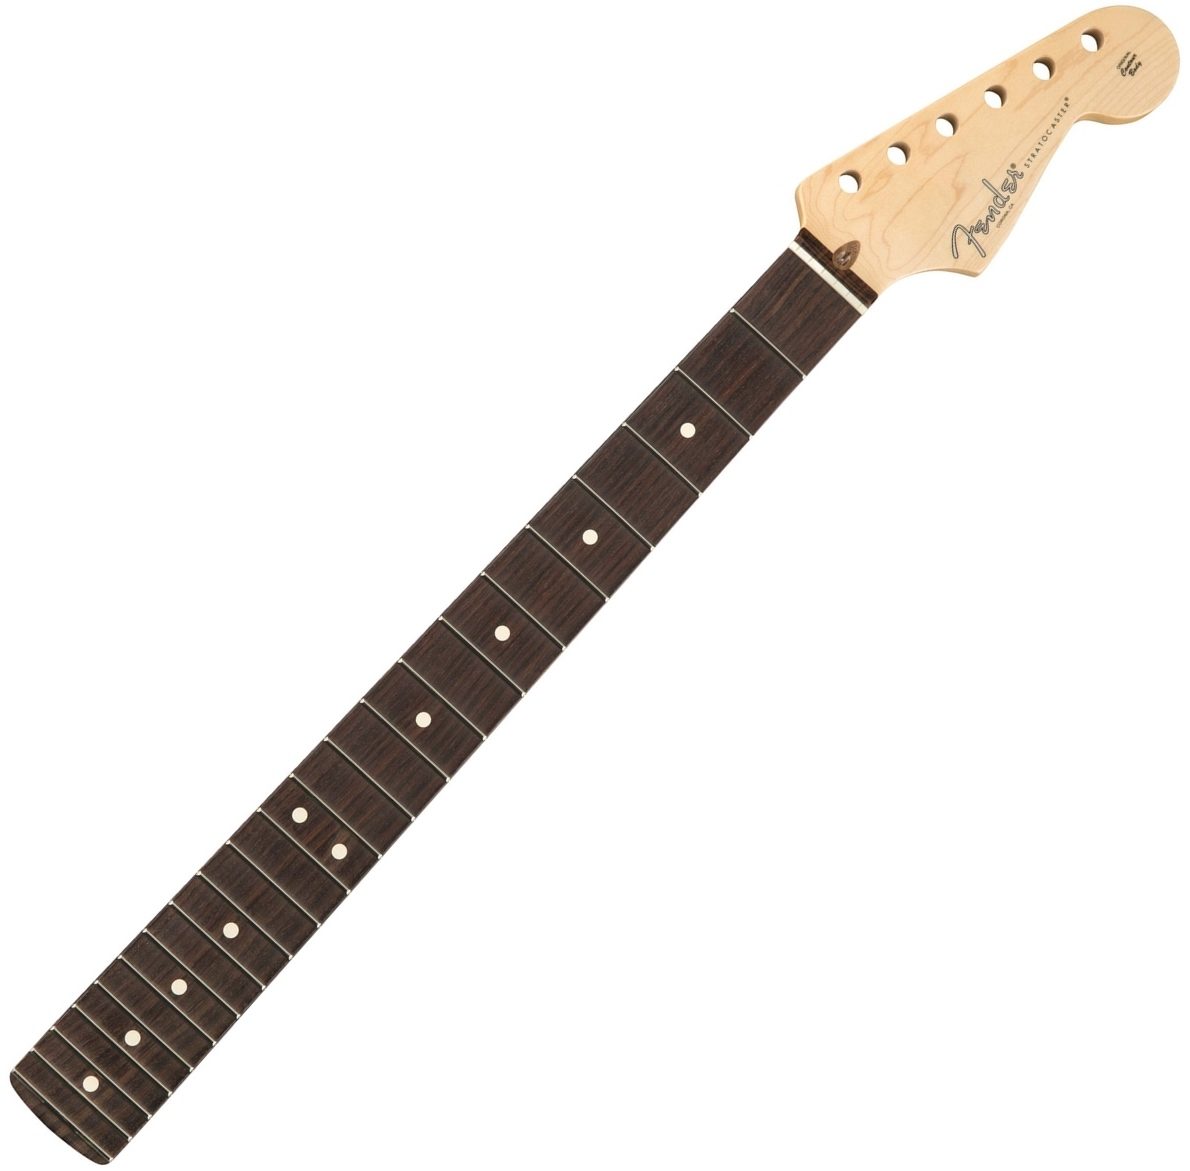 Fender American Pro Stratocaster Replacement Rosewood Neck